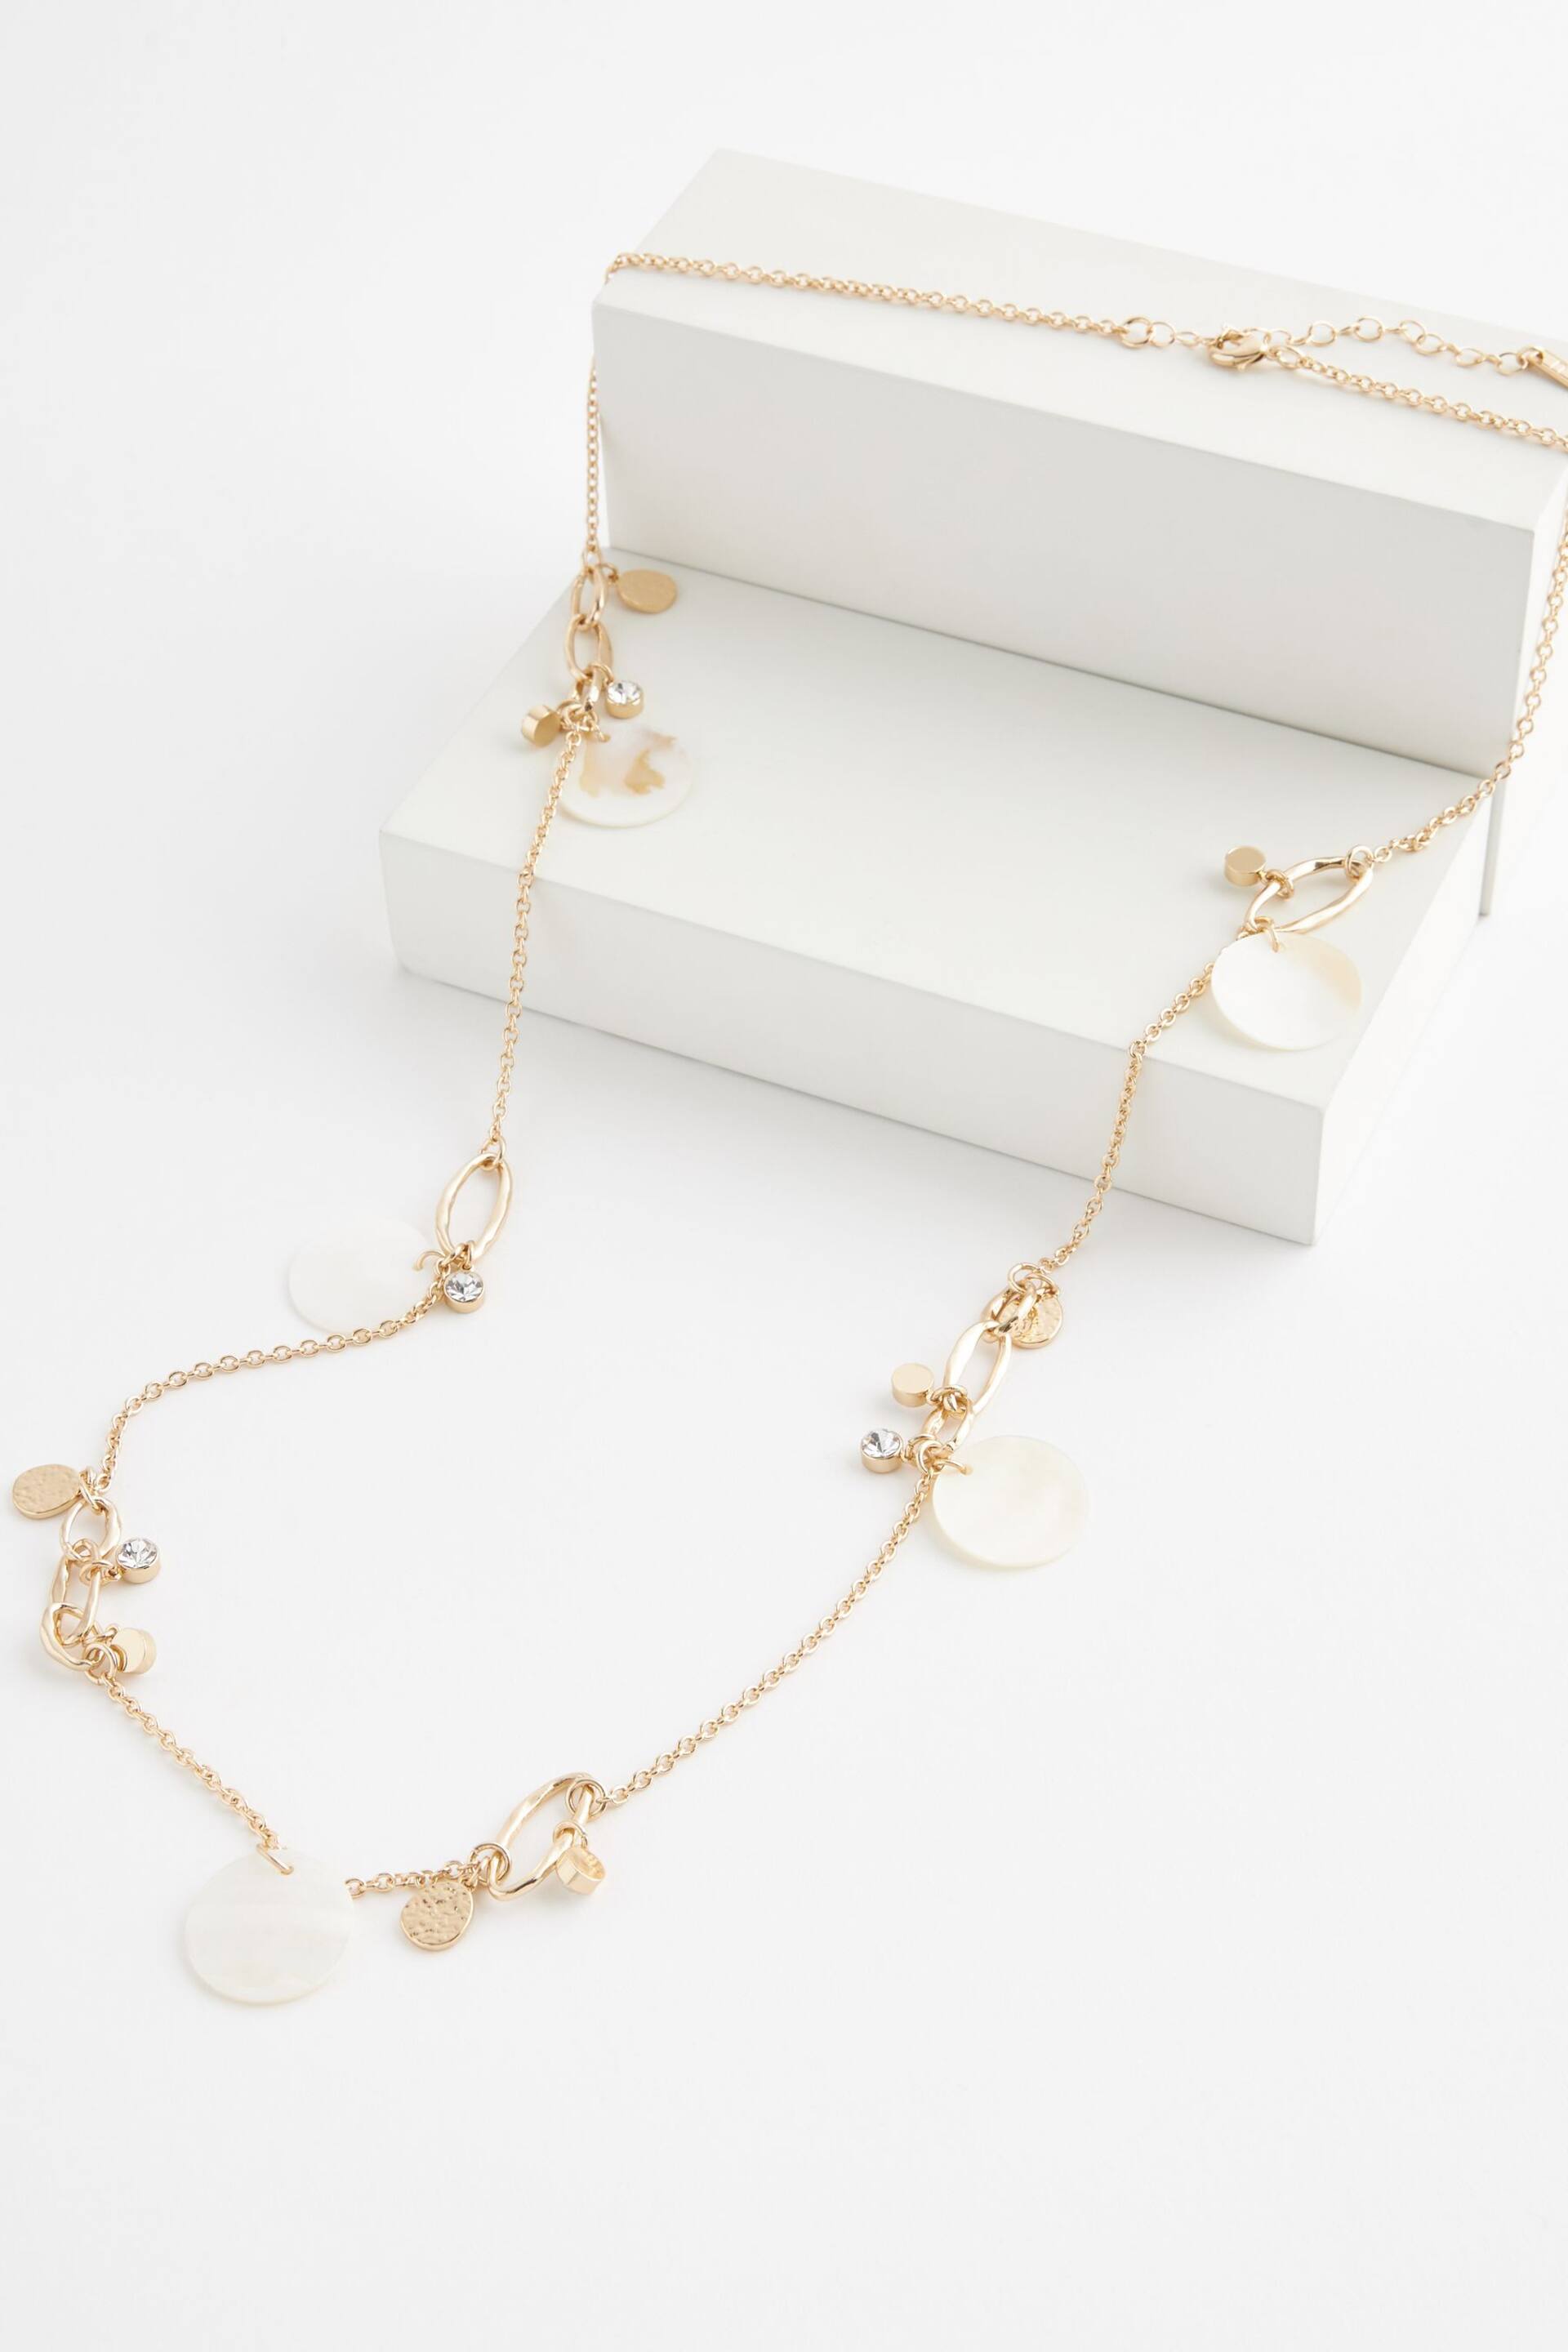 Gold Tone Shell Drop Long Rope Necklace - Image 4 of 4